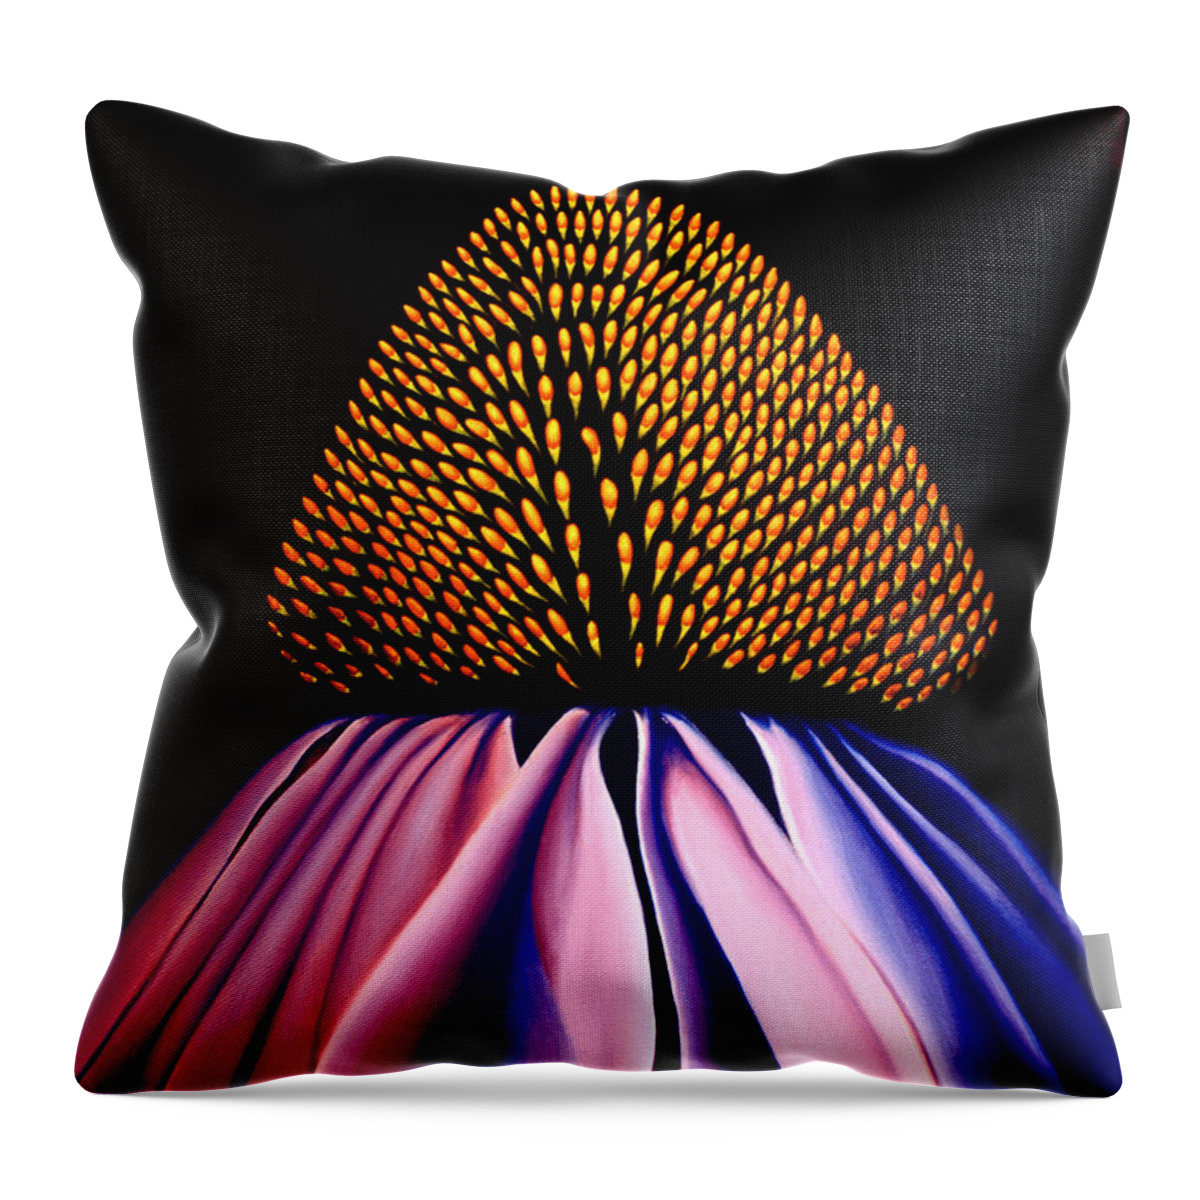 Echinacea Throw Pillow featuring the painting Echinacea by Anni Adkins